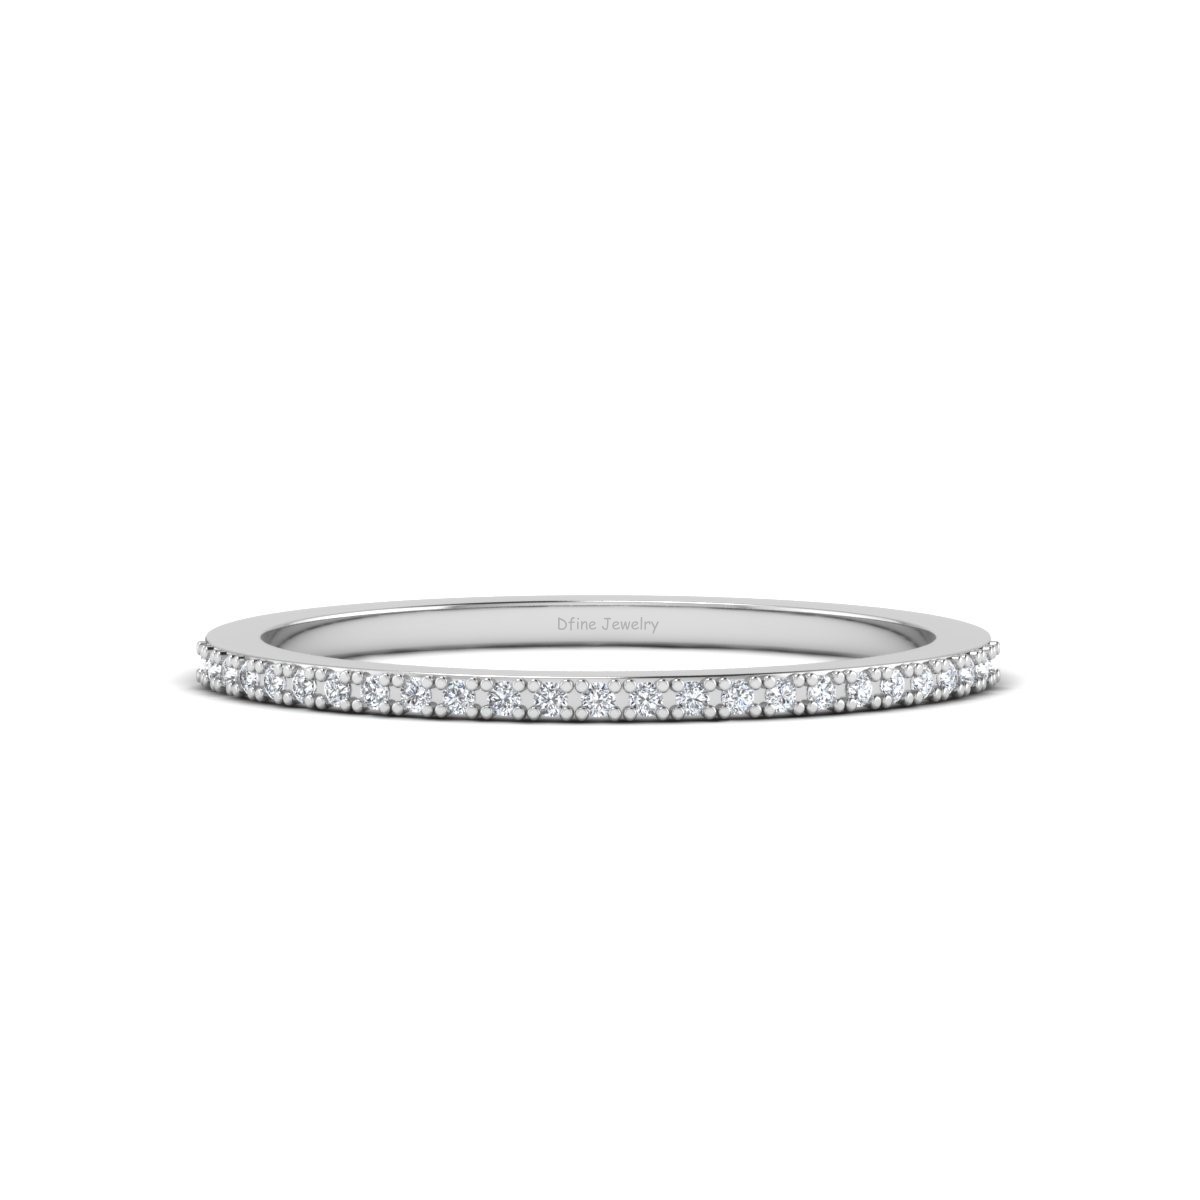 Solid 10k White Gold Stackable Ring 0.20tcw Diamond Wedding Band Eternity Ring